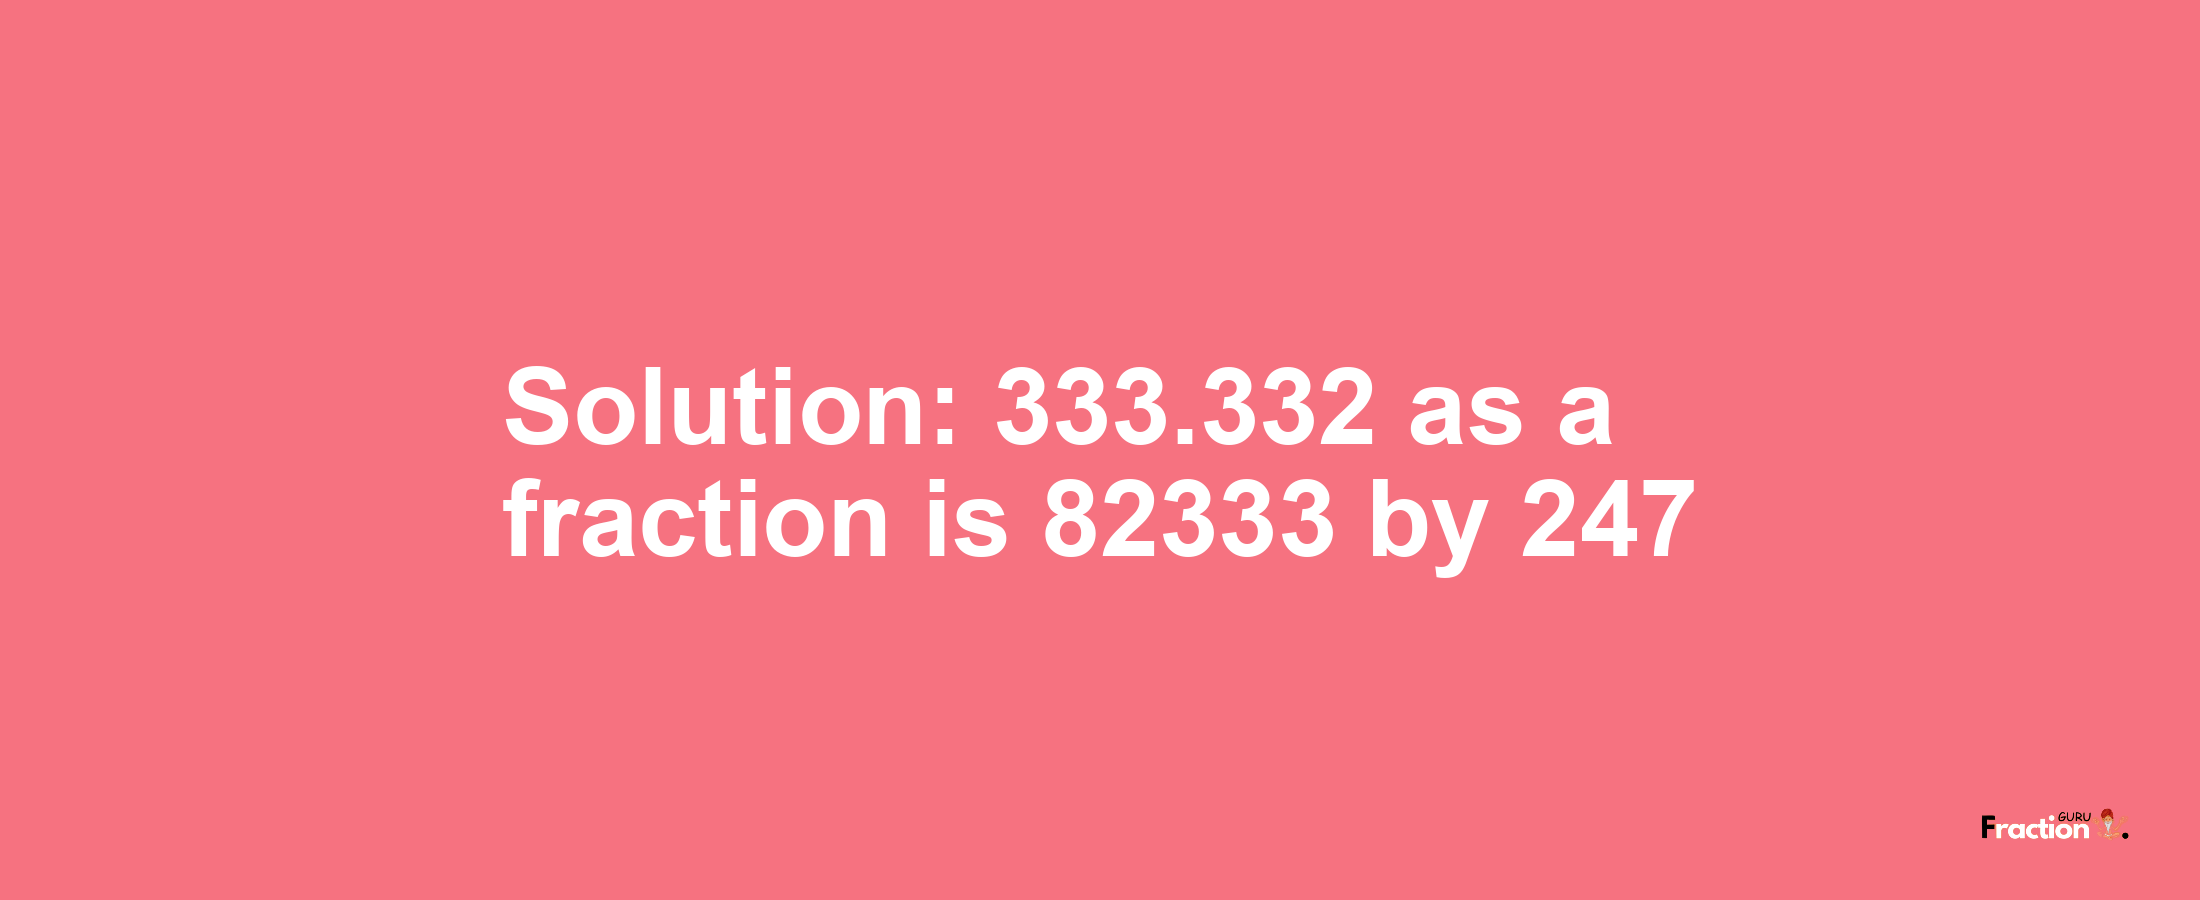 Solution:333.332 as a fraction is 82333/247